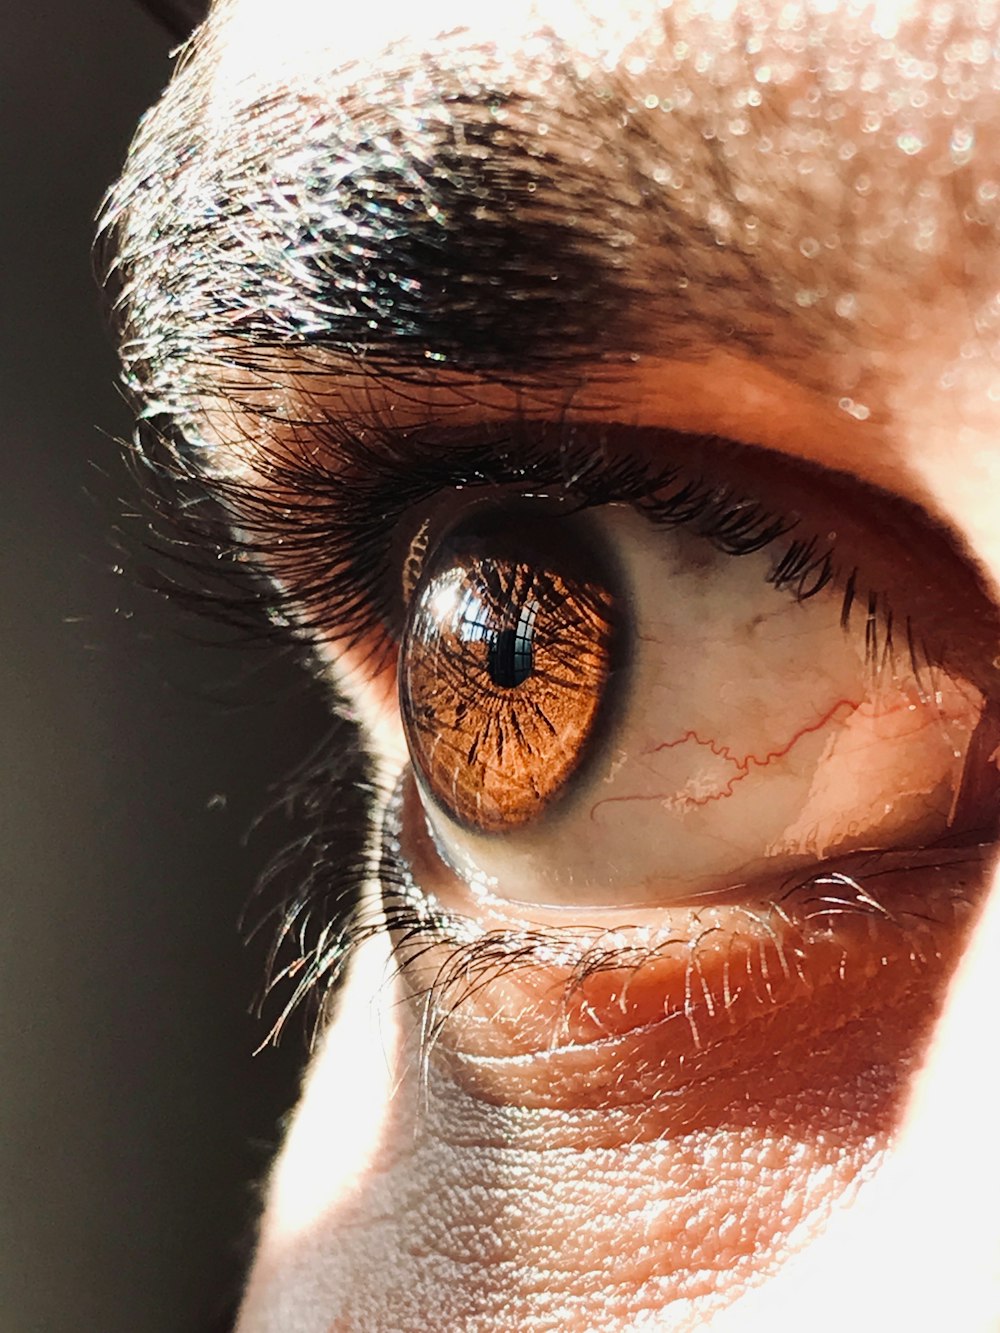 a close up of a person's brown eye